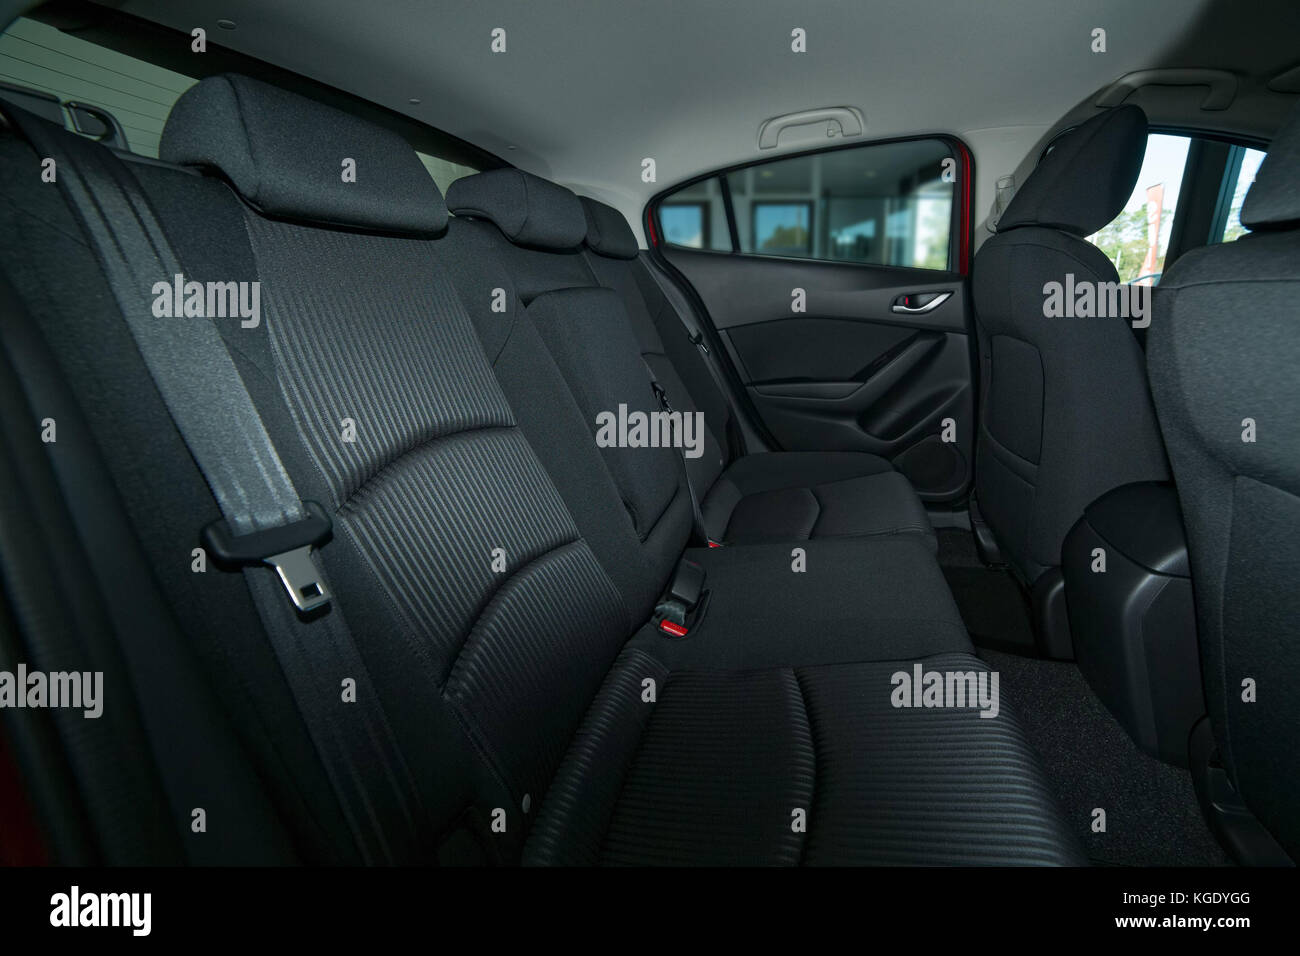 Modern car interior with back seat with seat belts, front seats and roof with a grab handle Stock Photo